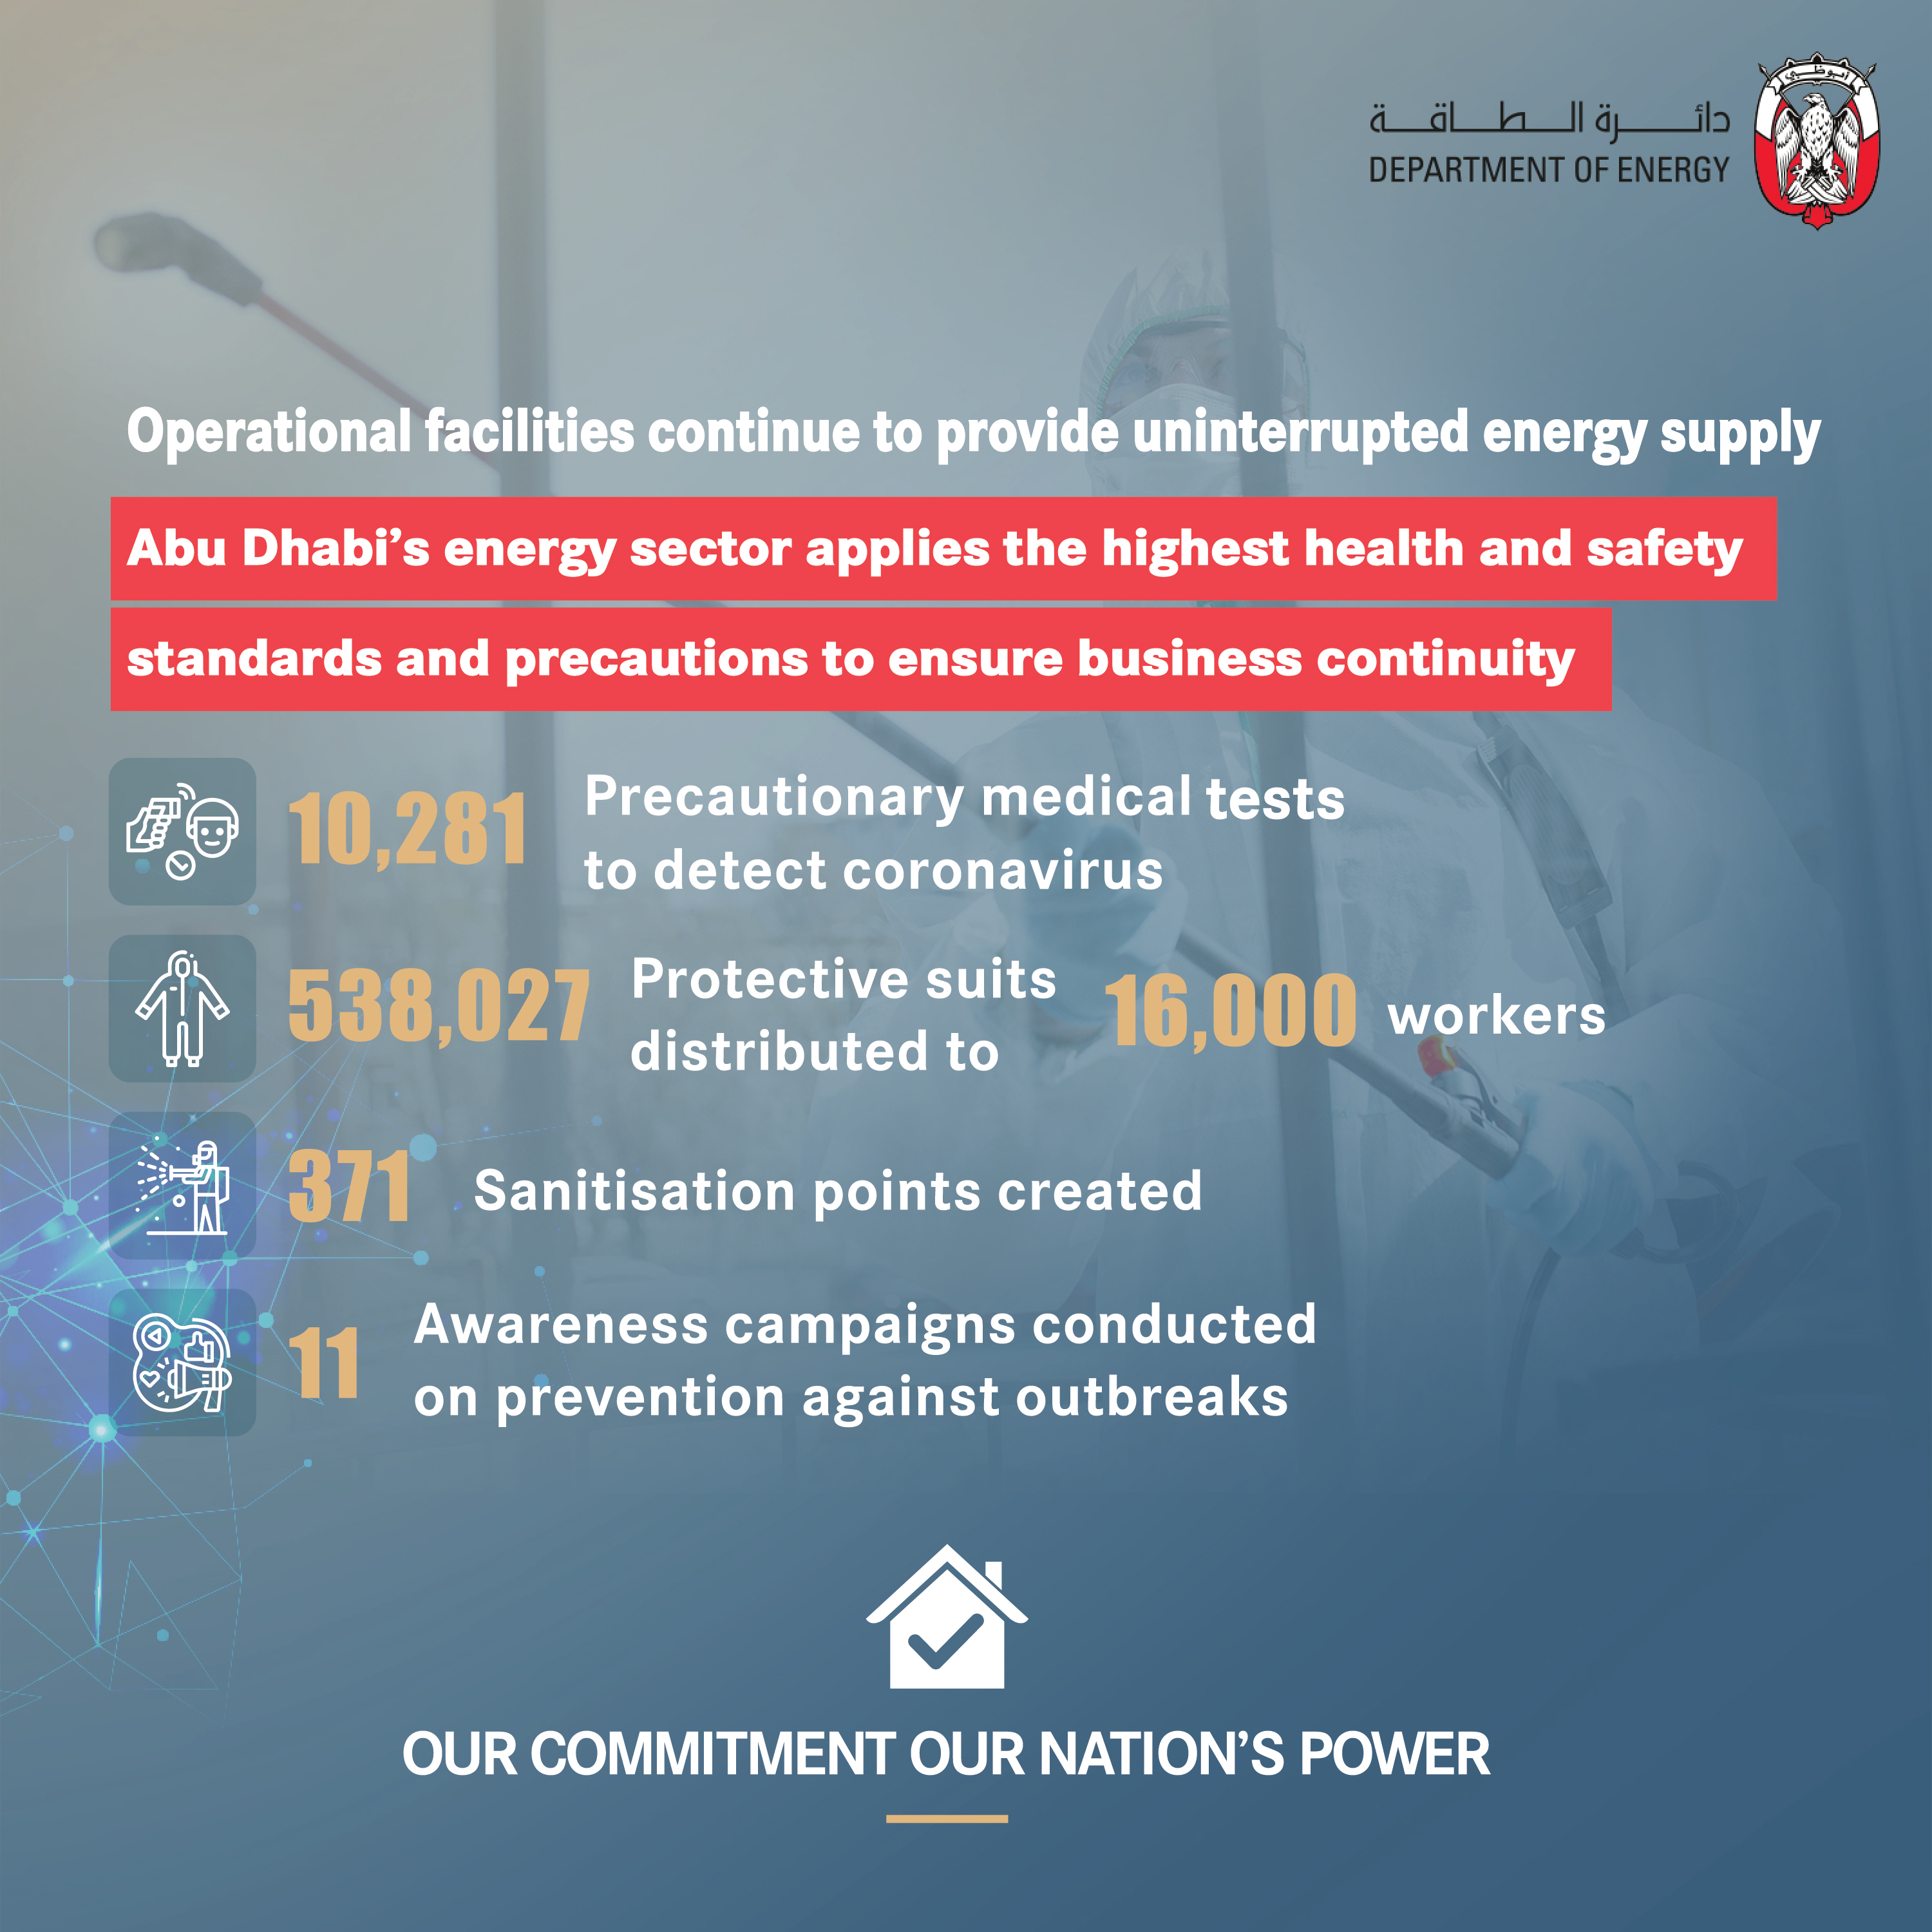 Abu Dhabi’s Energy Sector Applies The Highest Standards Of Precautionary And Preventative Measures To Ensure Business Continuity And The Safety Of All Employees